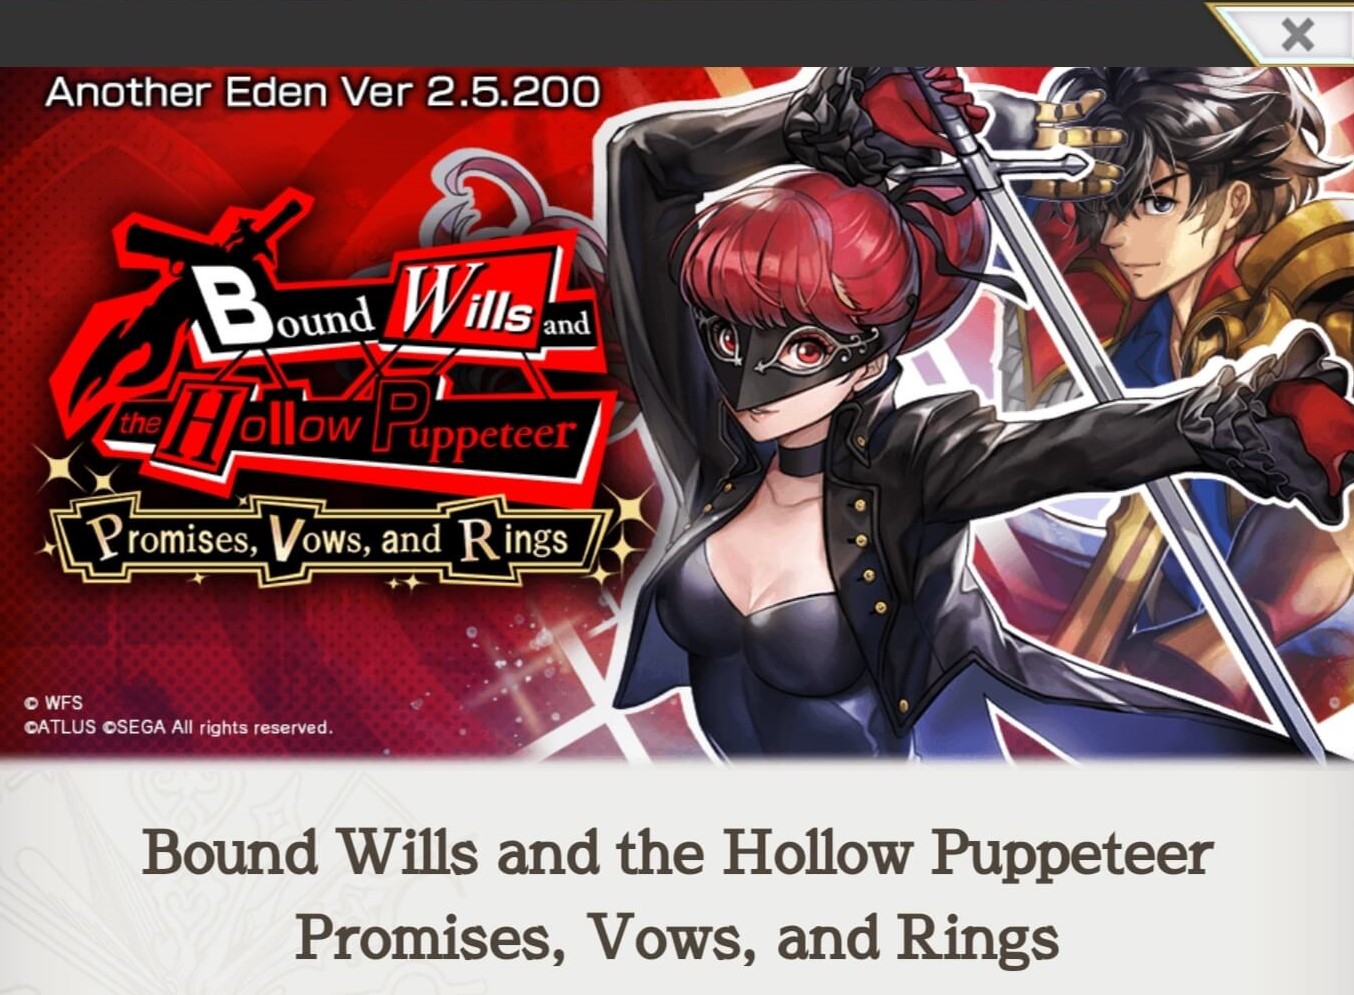 Persona 5 Royal Collab in Another Eden